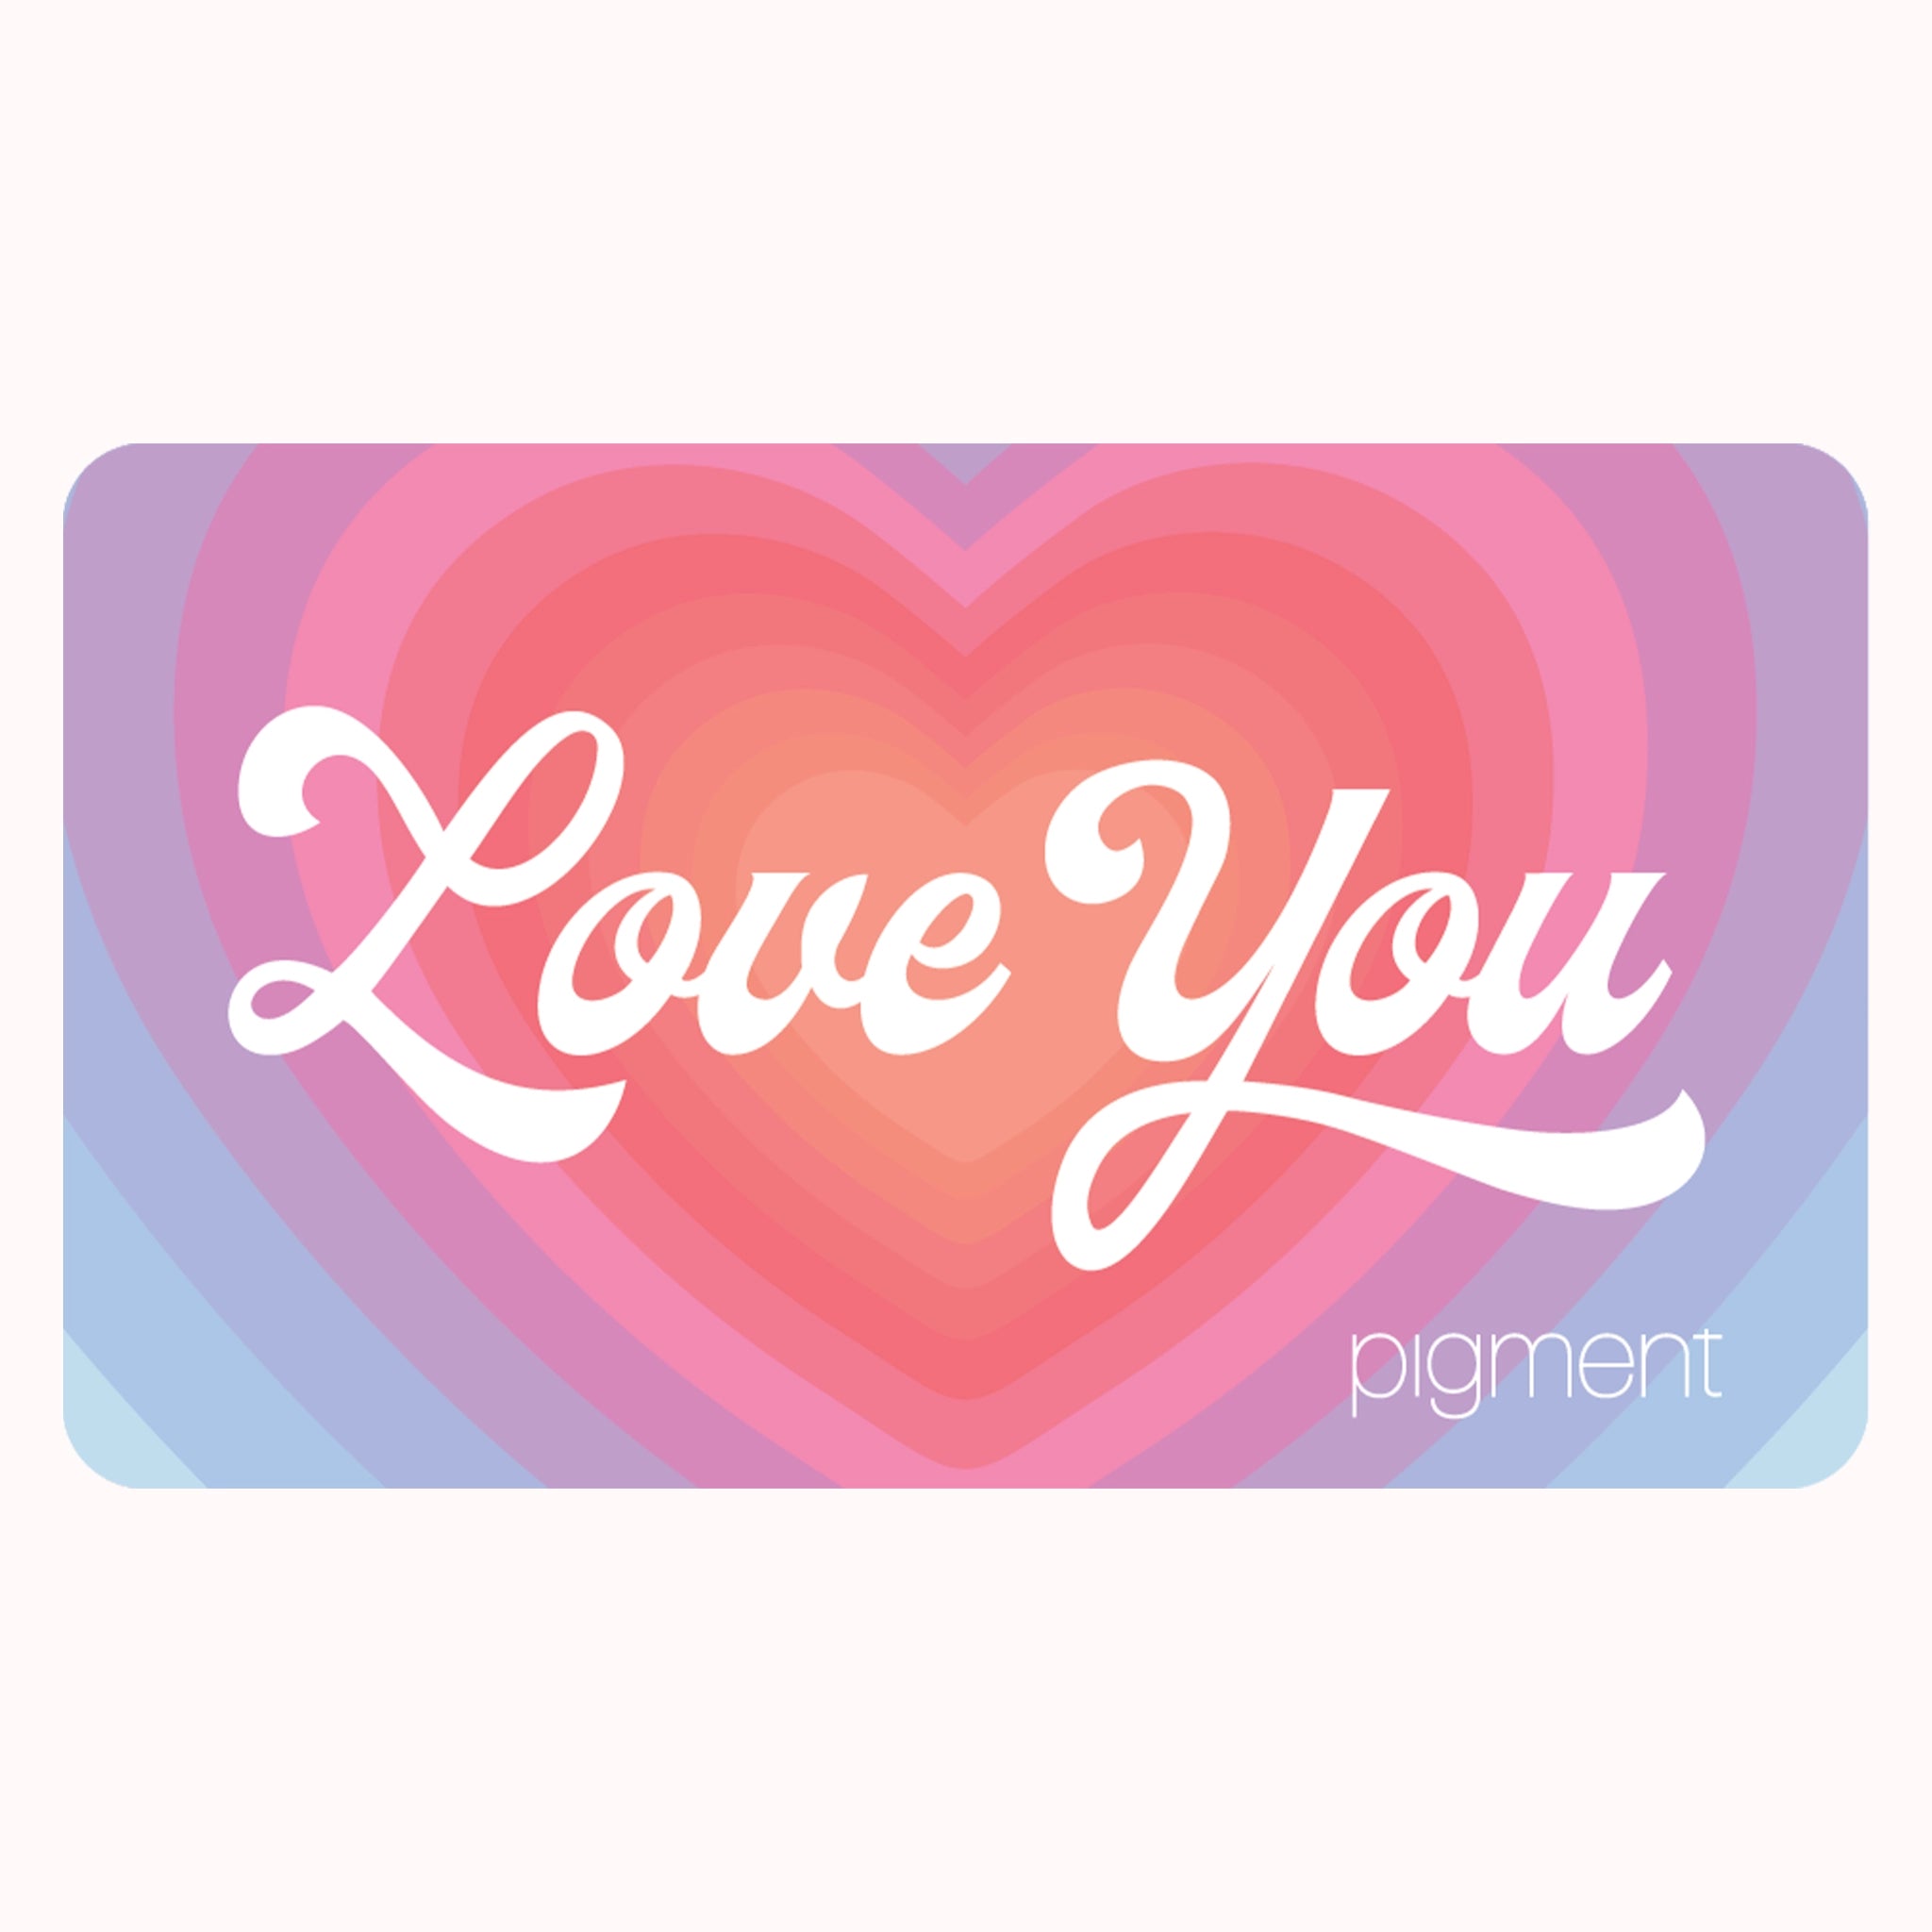 On a white background is a pink, purple and red gradient heart gift card with white text in the center that reads, "Love You" along with much smaller letters in the bottom right corner that reads, "Pigment".